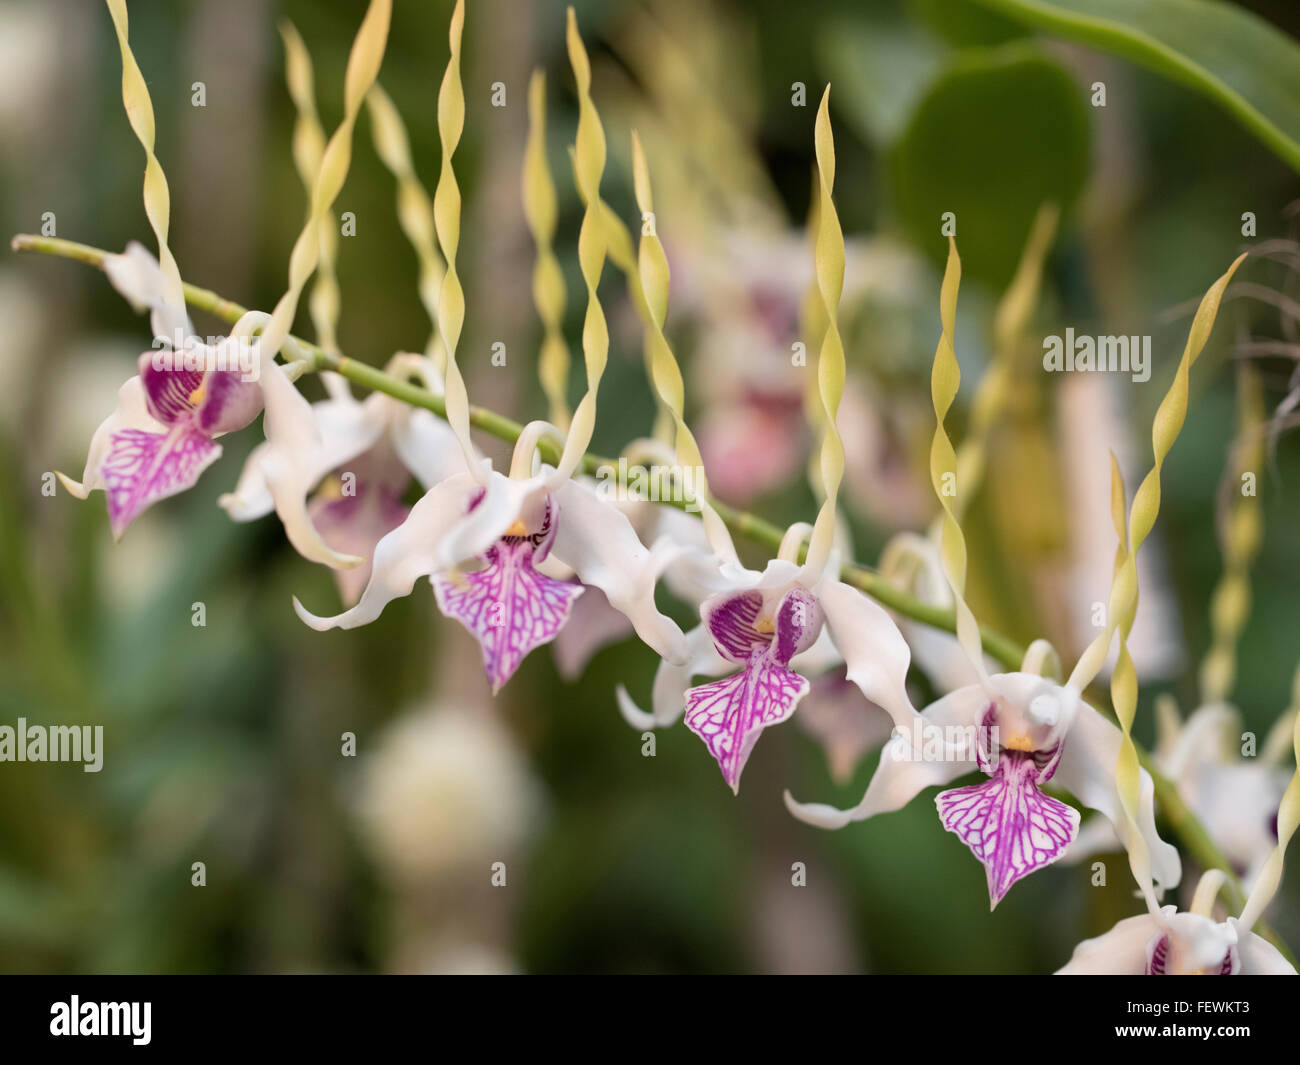 Dendrobium Stratiotes Orchids at International Orchid Festival, Expo Park, Okinawa Stock Photo